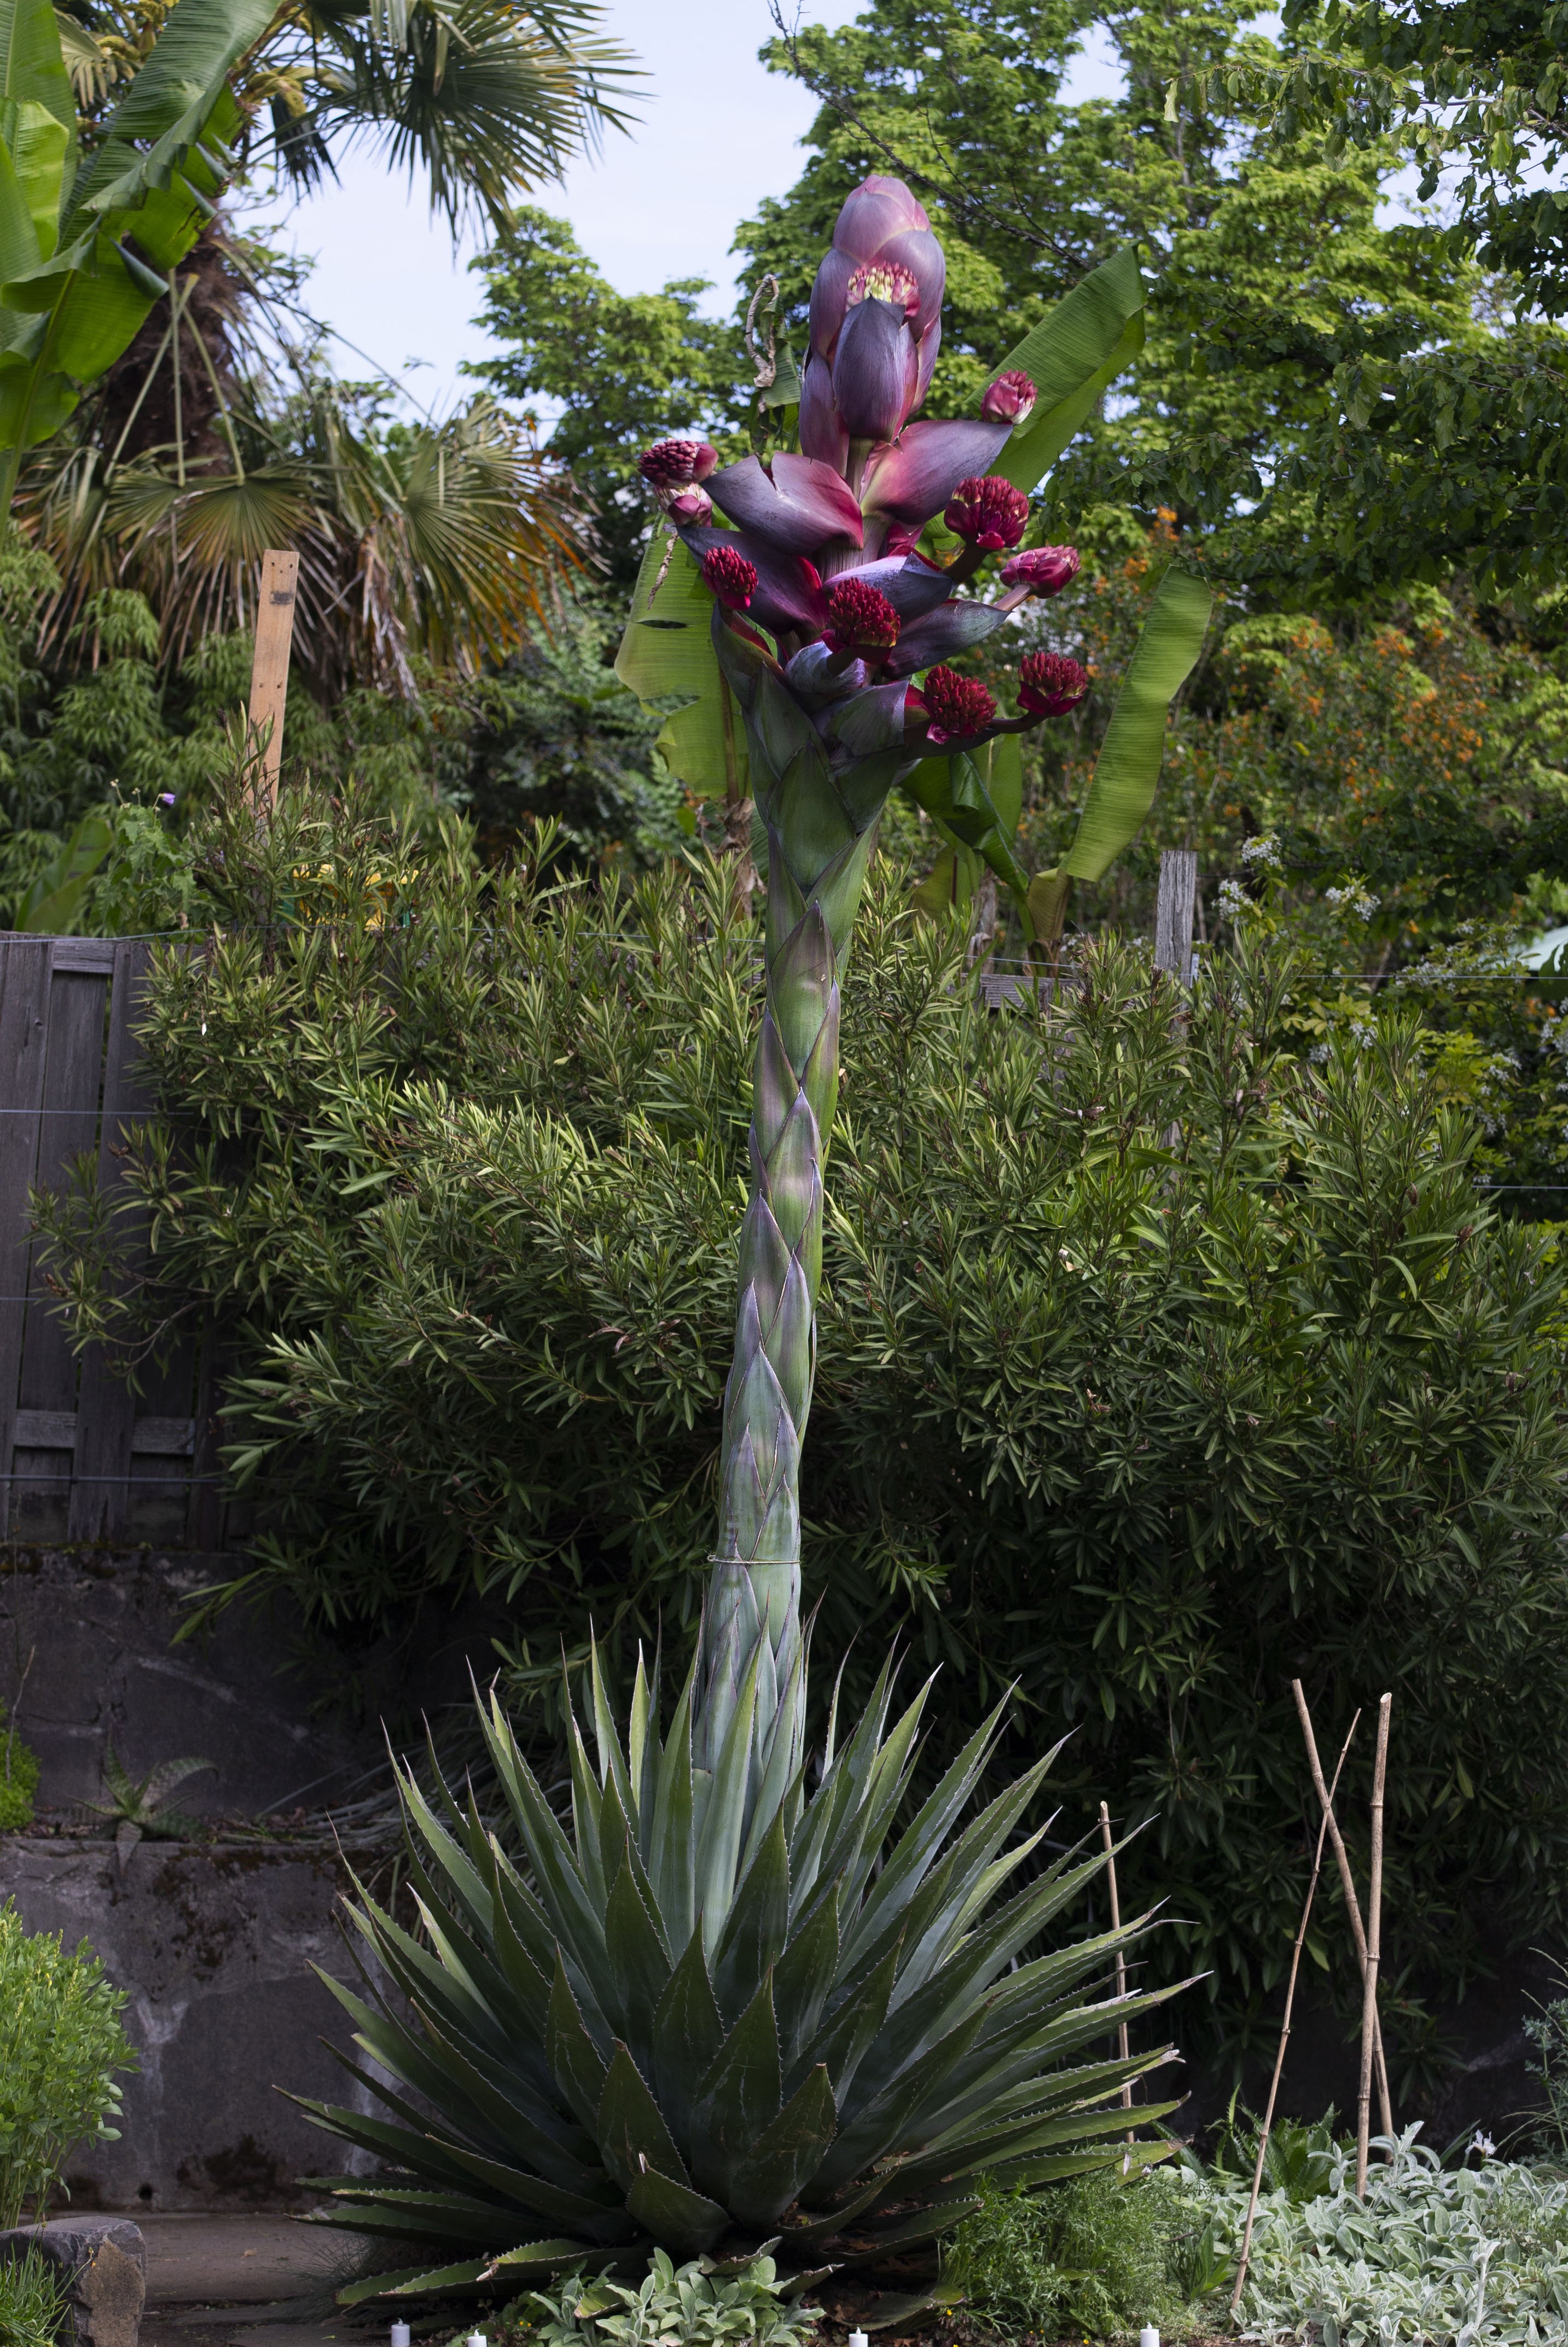 Giant agave plant's rare bloom causes stir in Portland